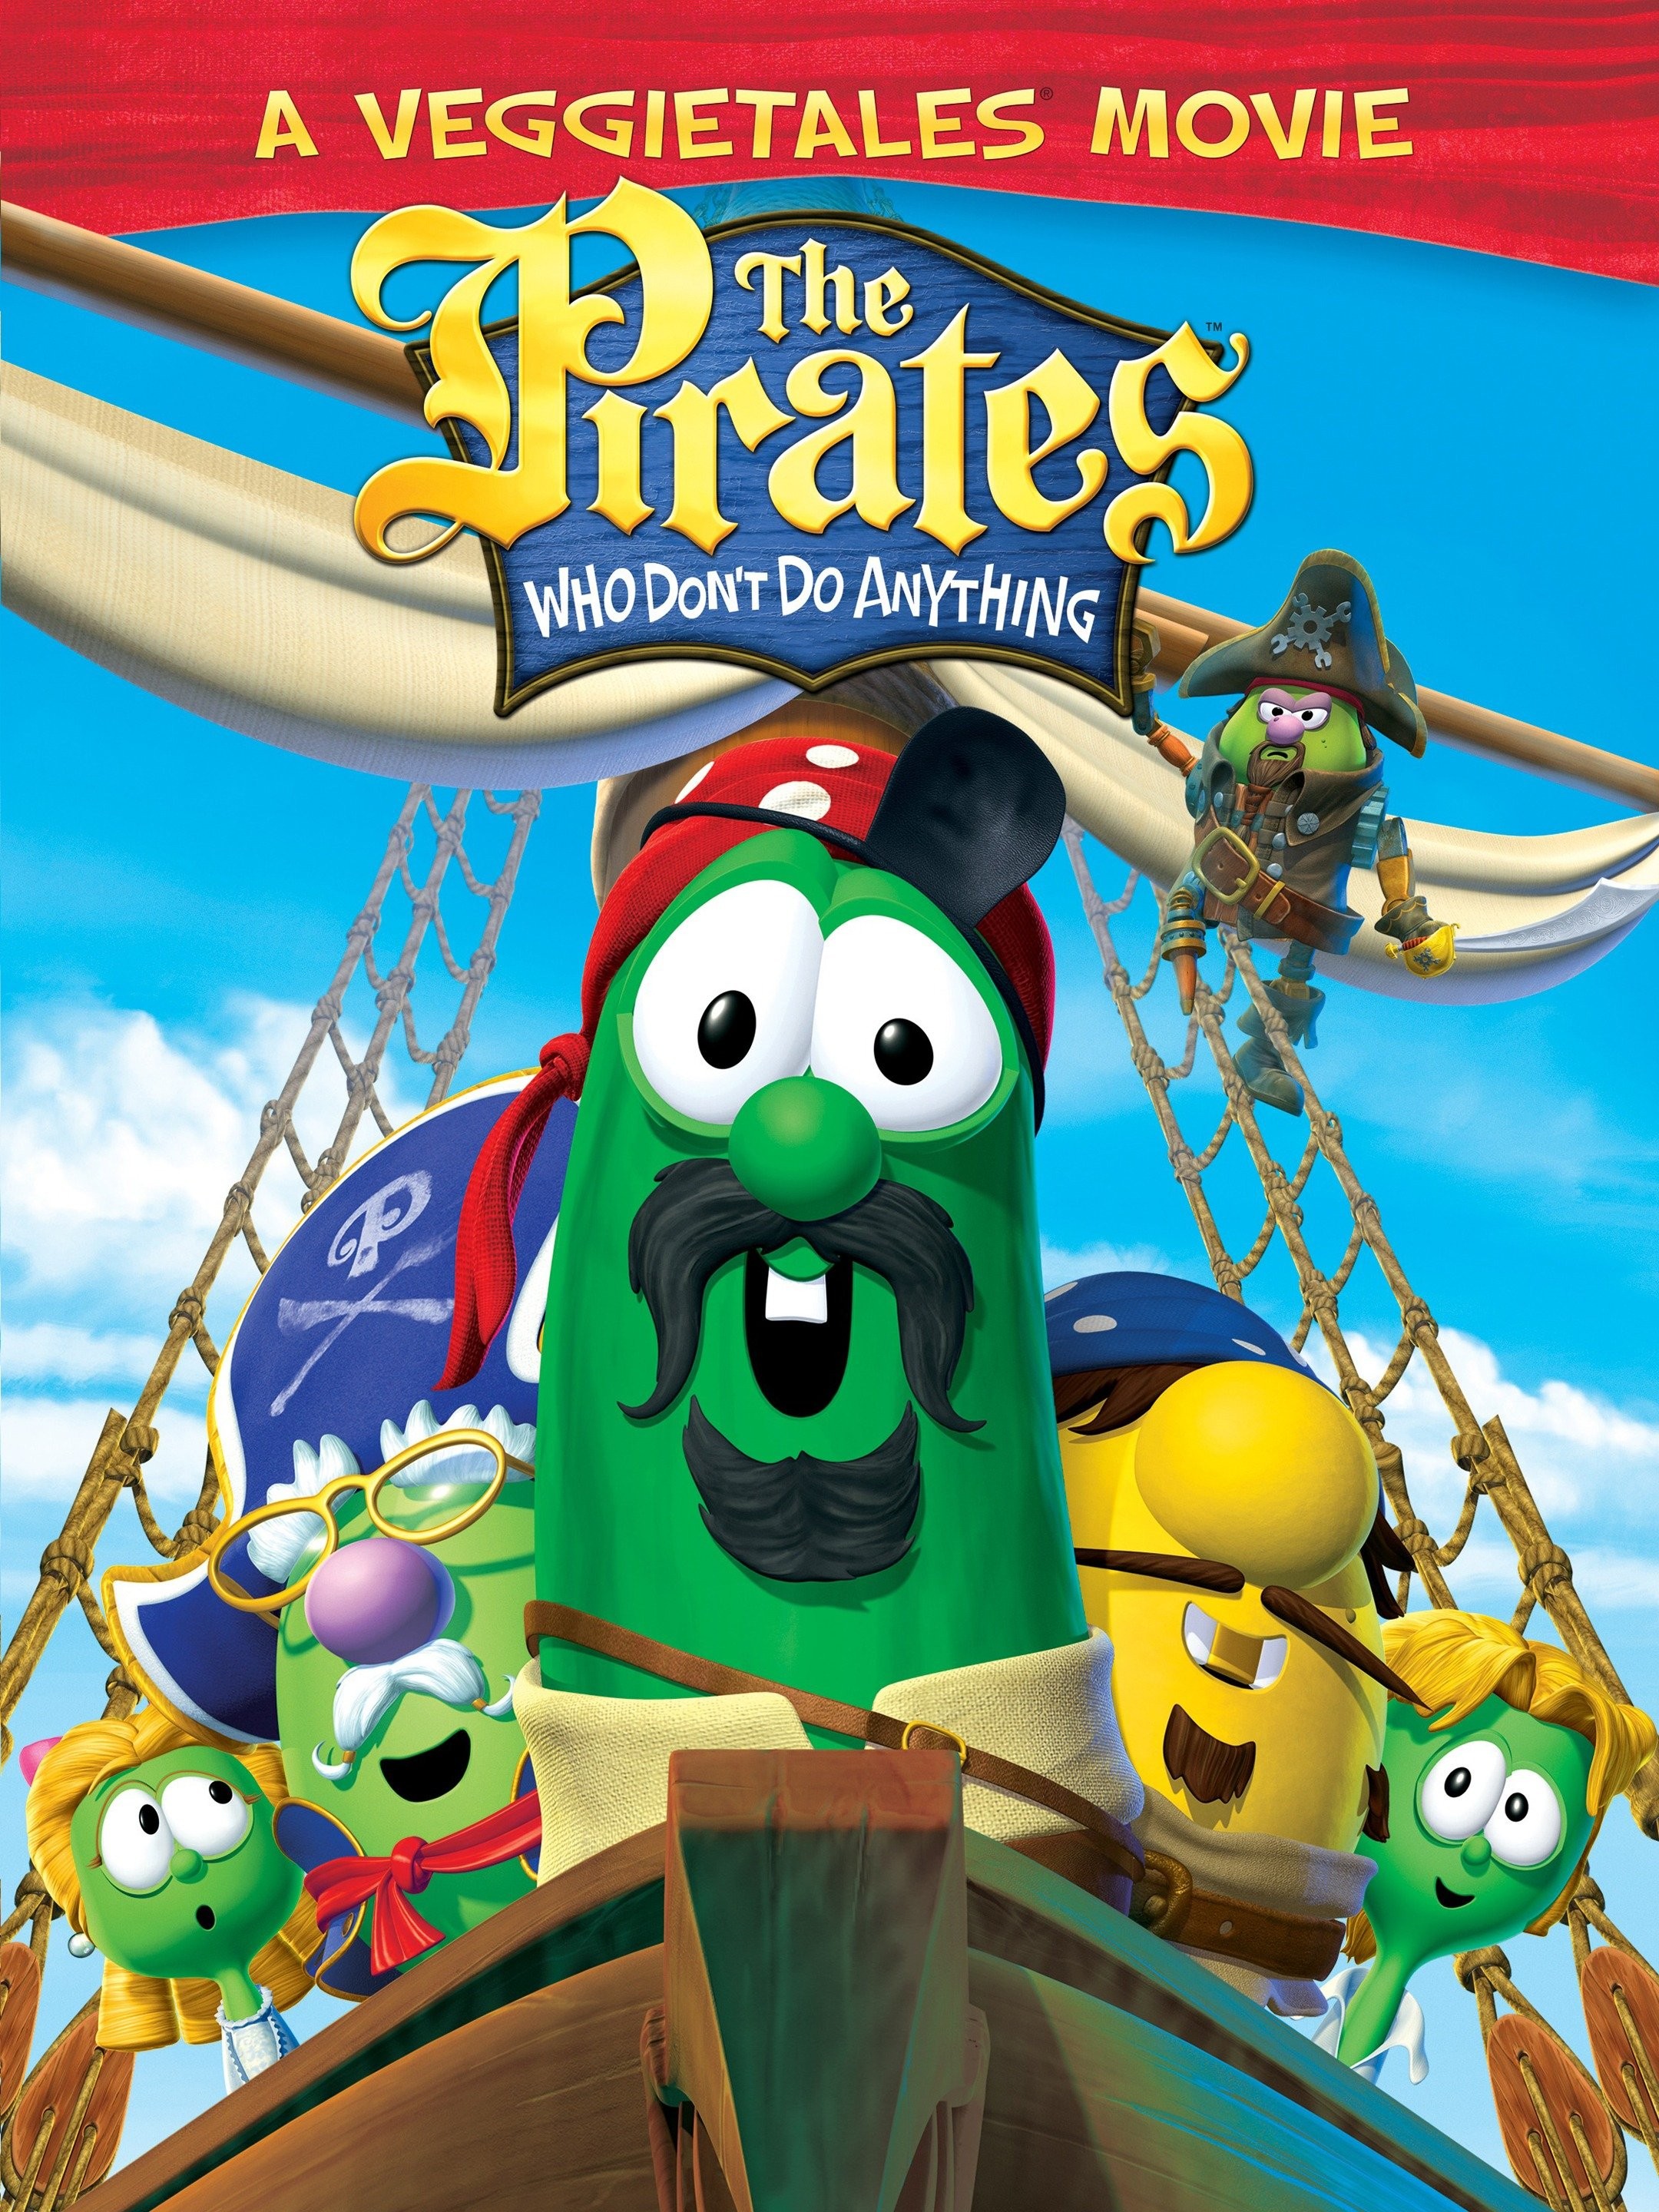 The Pirates Who Don't Do Anything: A VeggieTales Movie Trailer